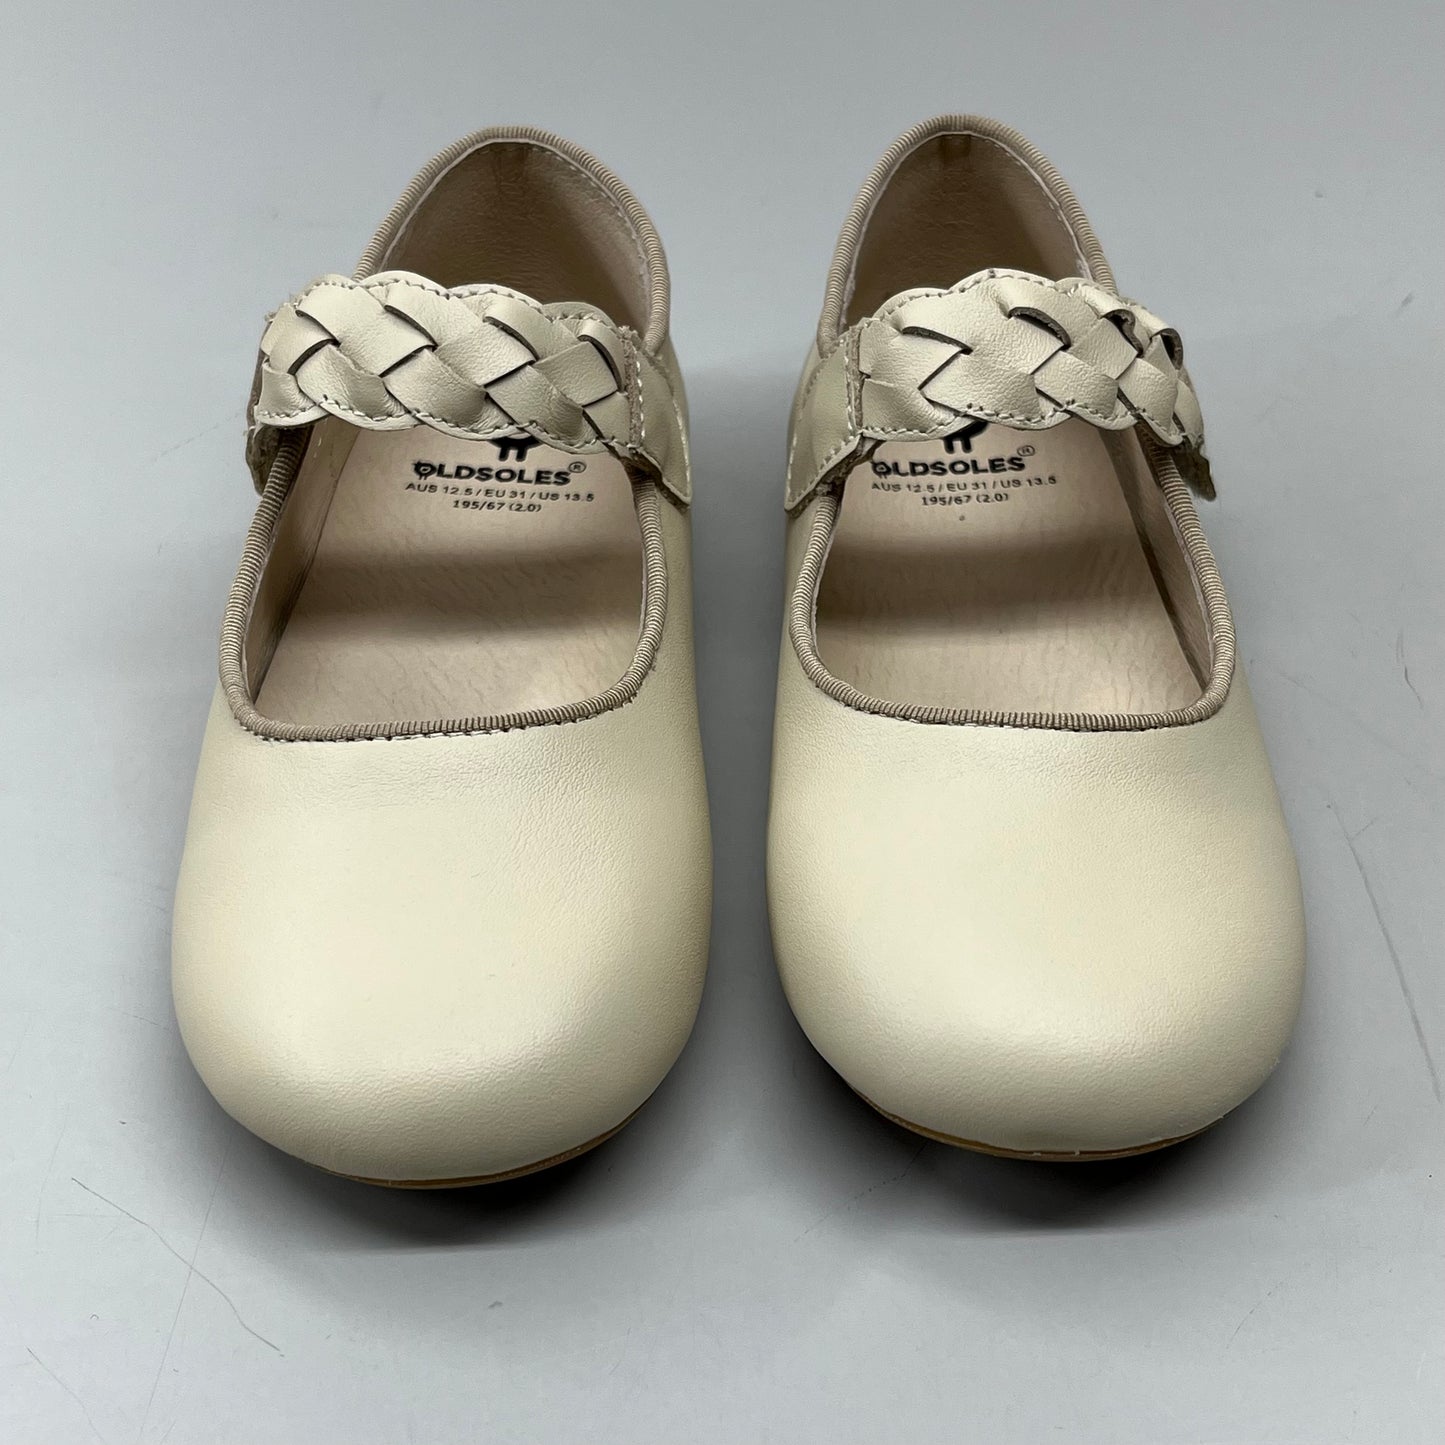 OLD SOLES Lady Plat Braided Strap Leather Shoe Kid’s Sz 34 US 2.5 Cream #817